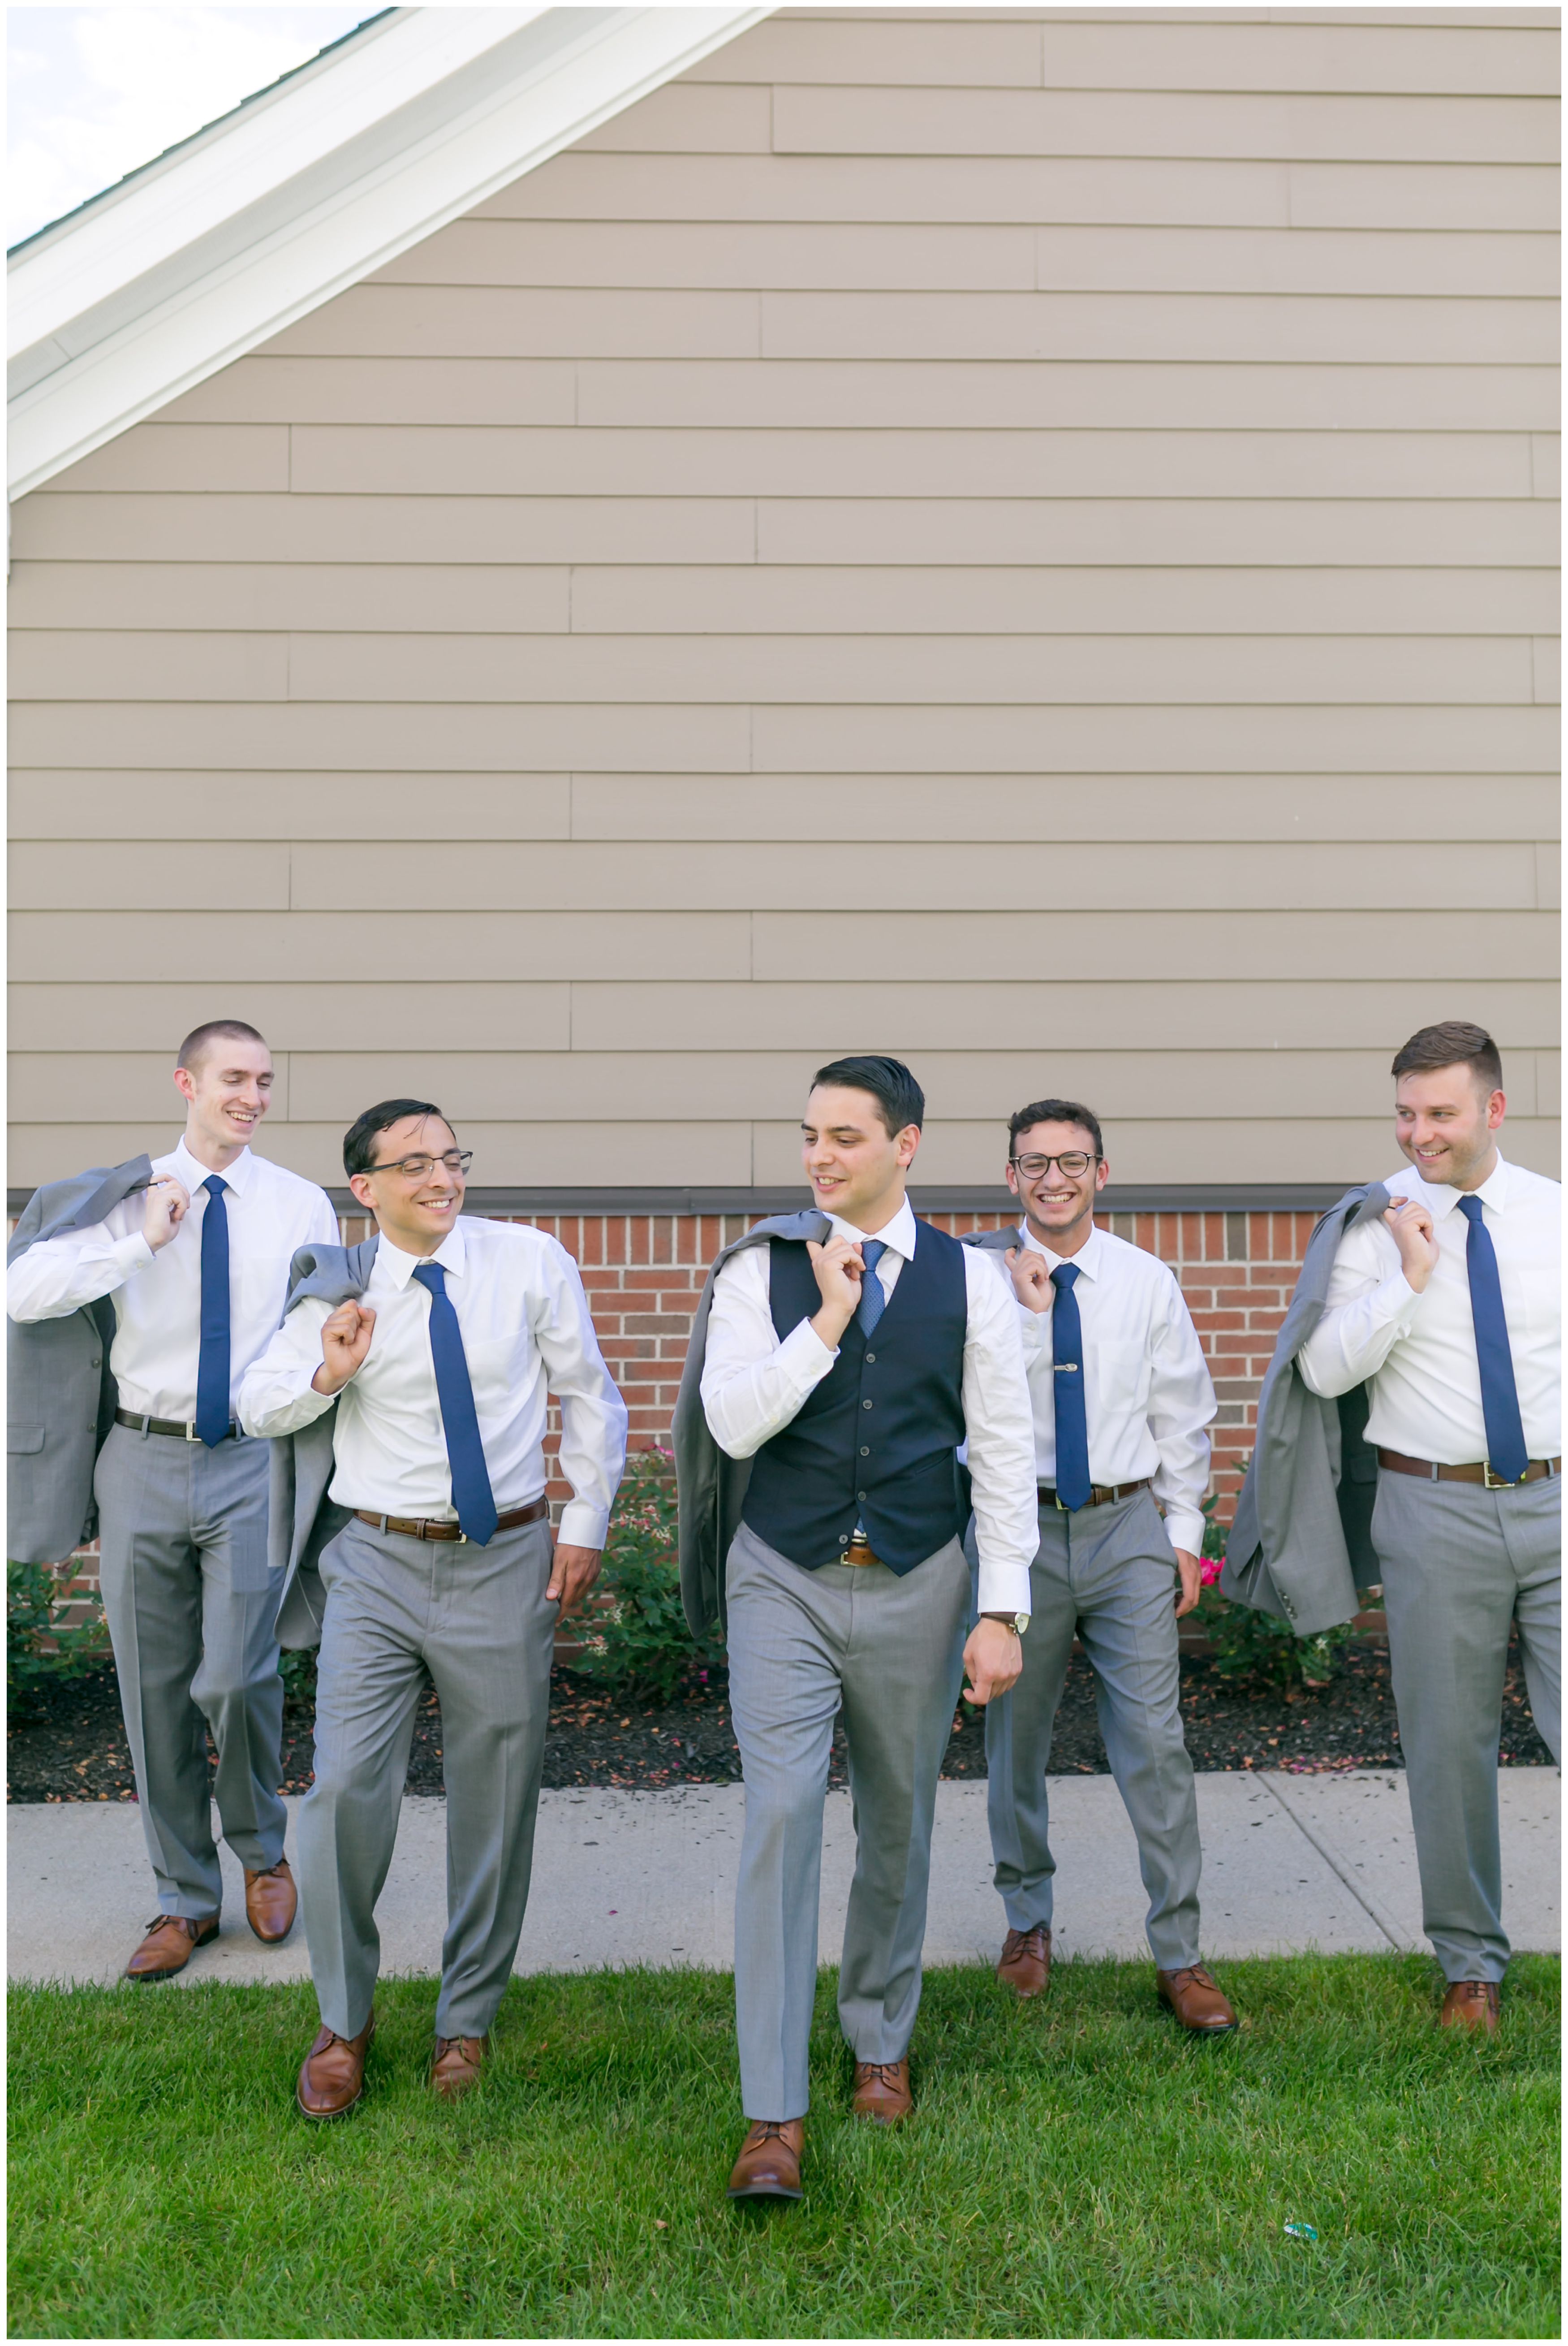 Groom and groomsmen in light grey suits and navy vests and ties with jackets off